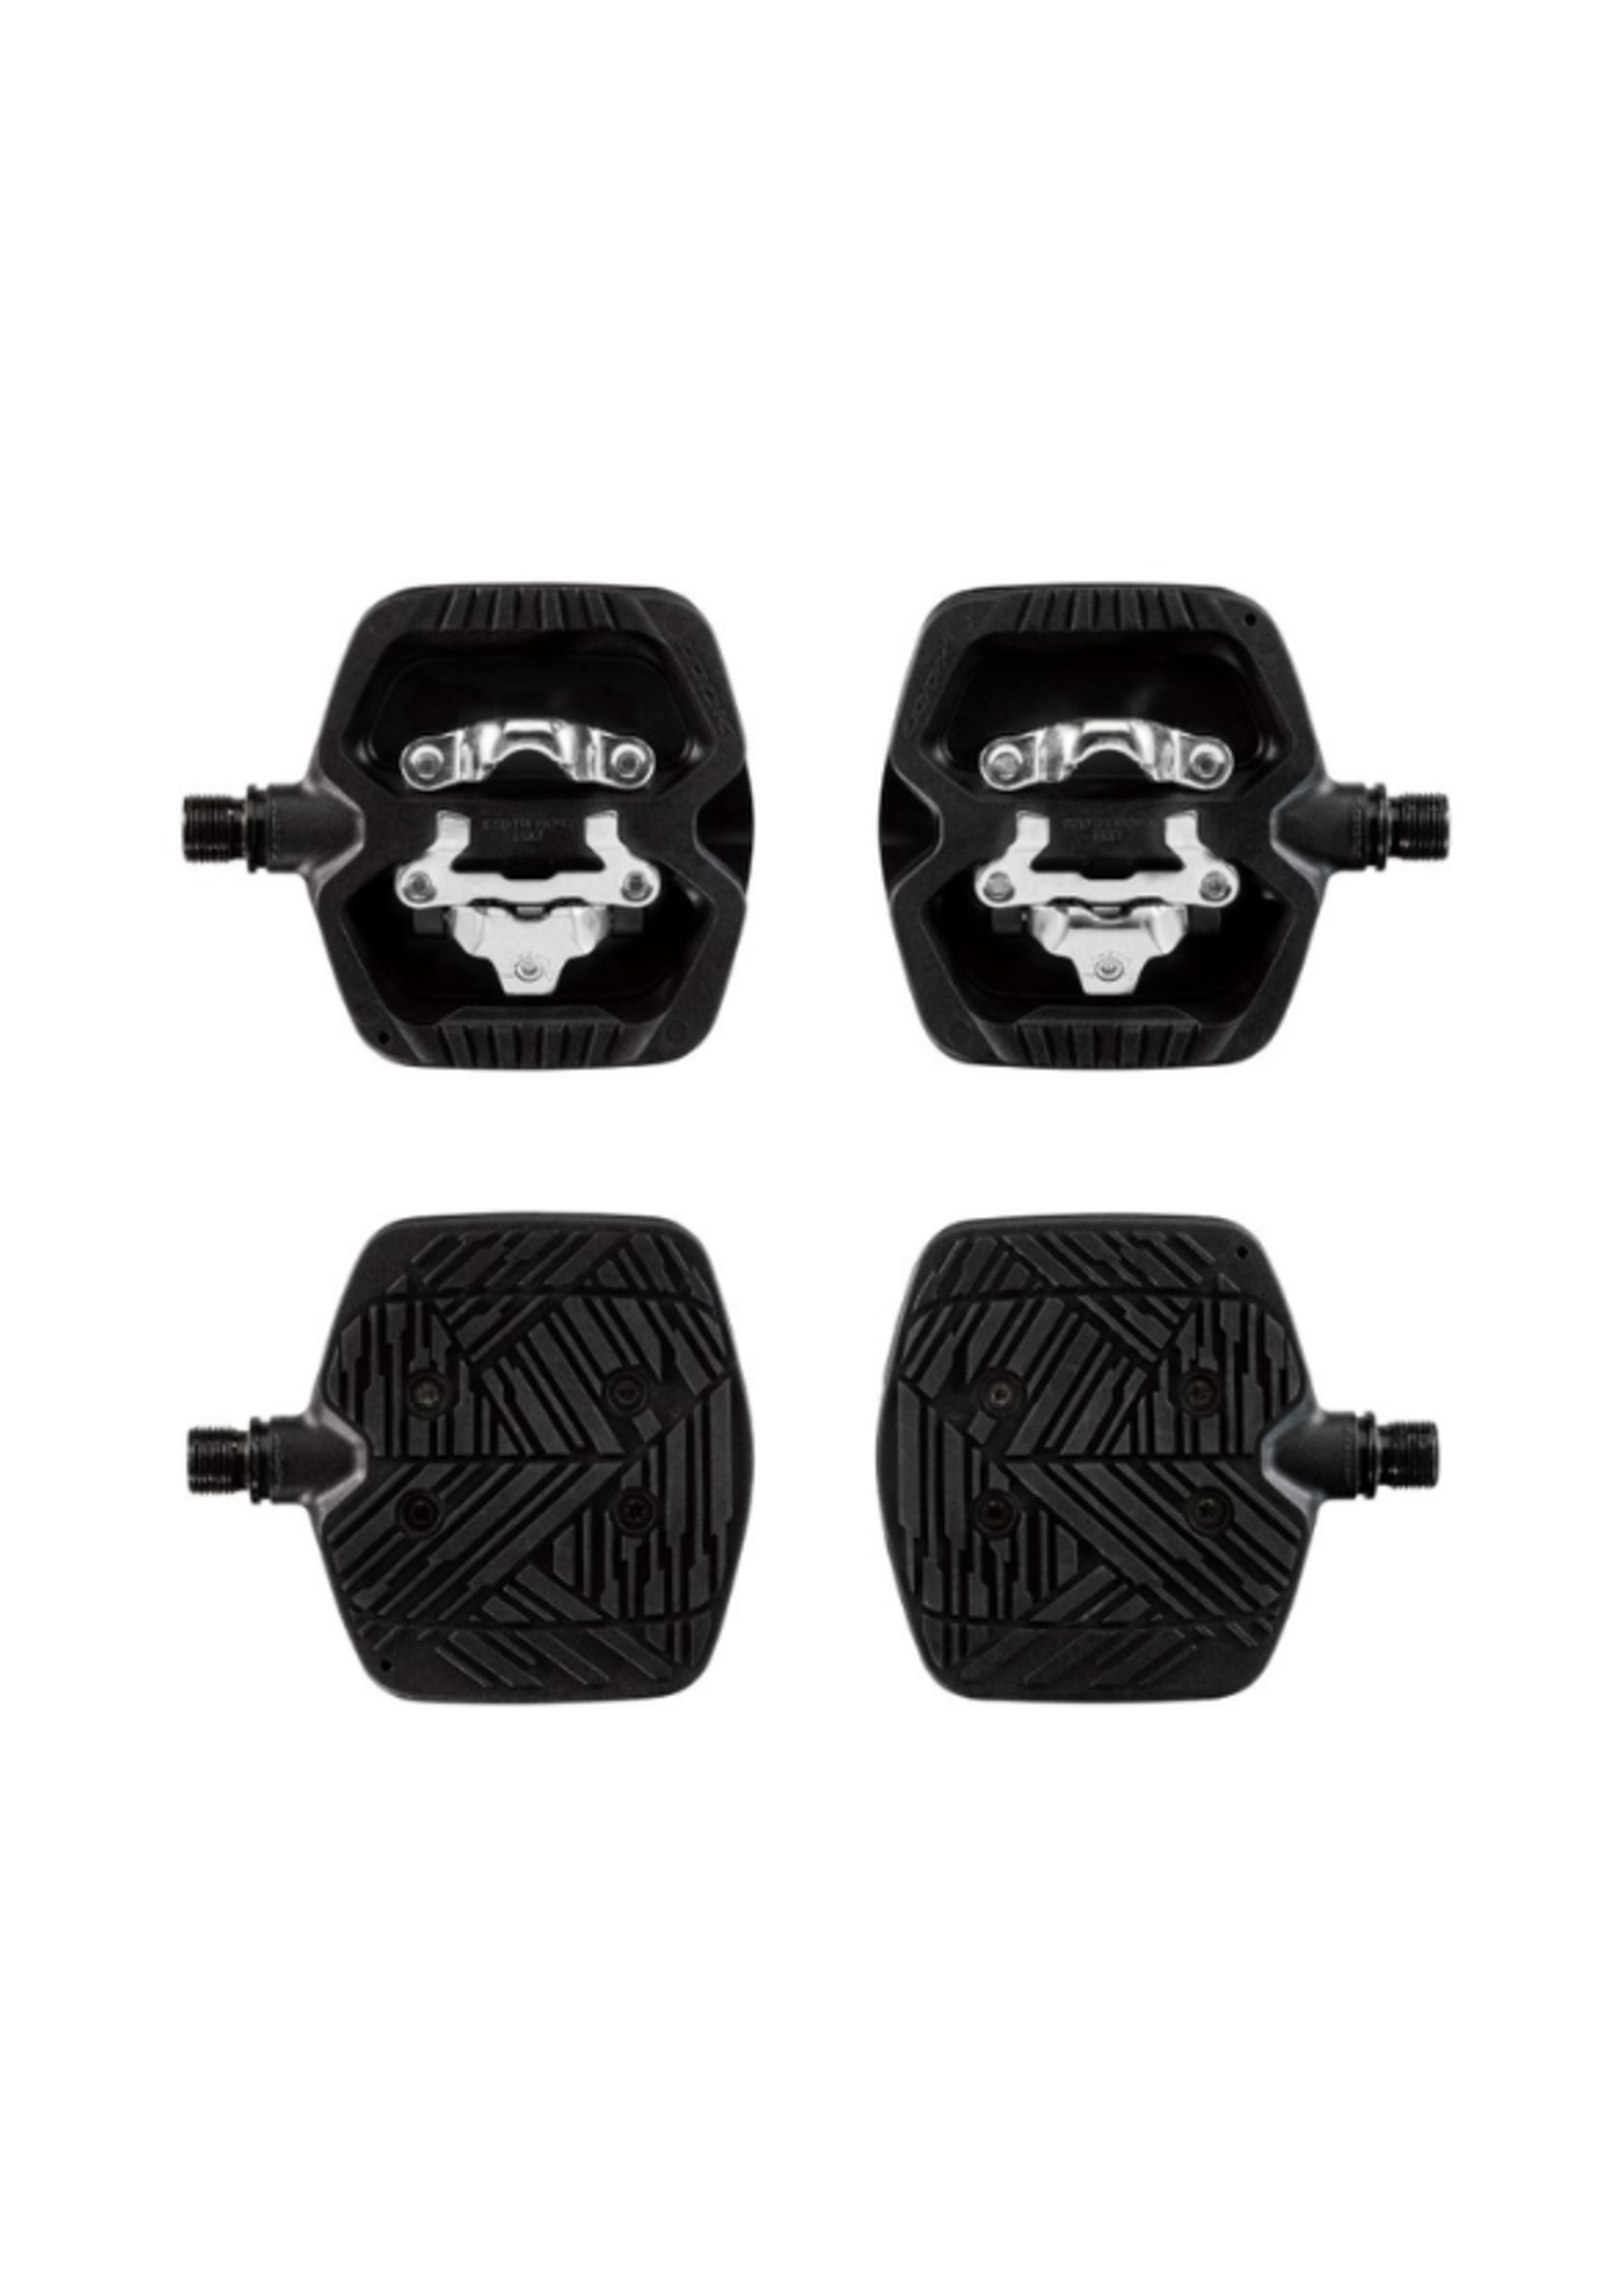 Look LOOK GEO TREKKING GRIP Pedals - Single Side Clipless with Platform, Chromoly, 9/16", Black